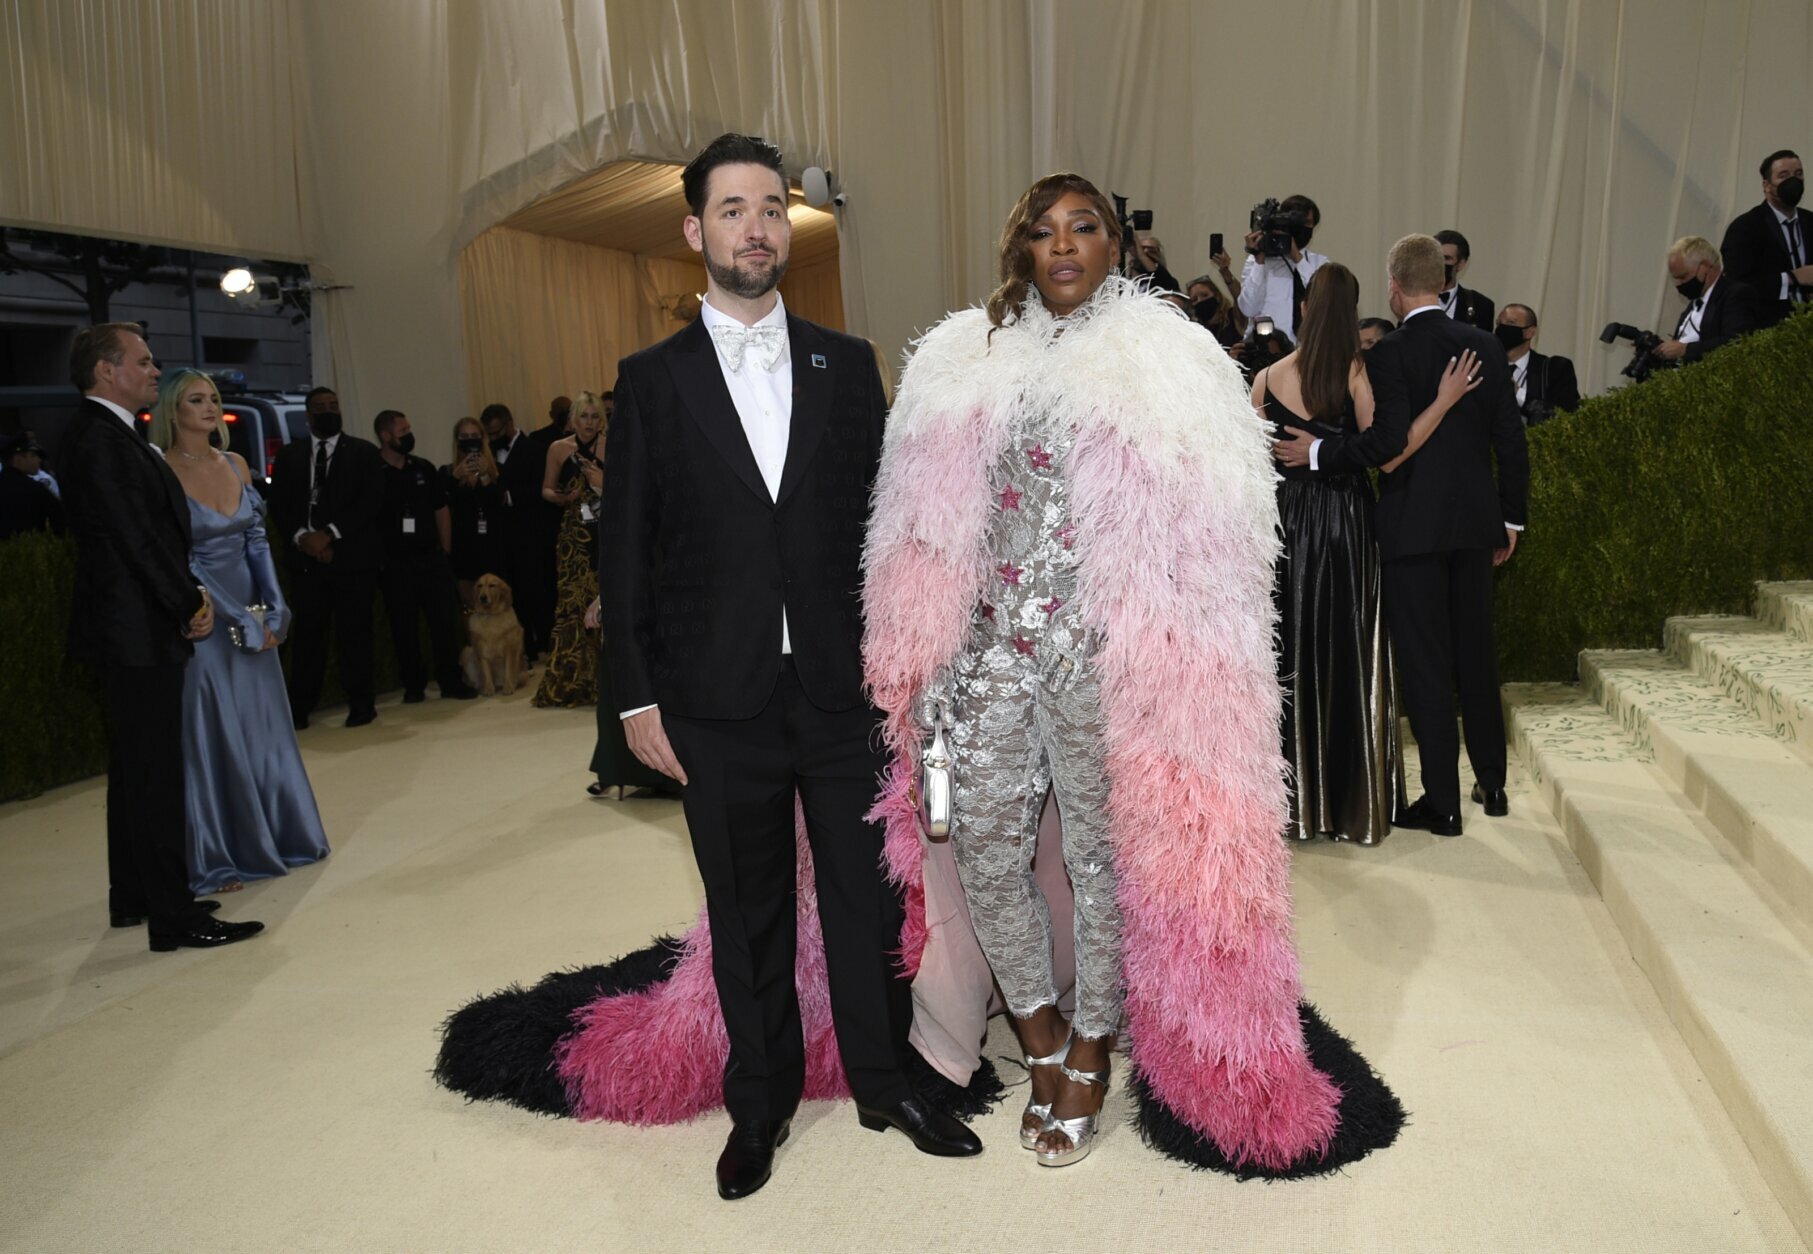 J Balvin Details How His Brightly Colored Met Gala Look Came to Life